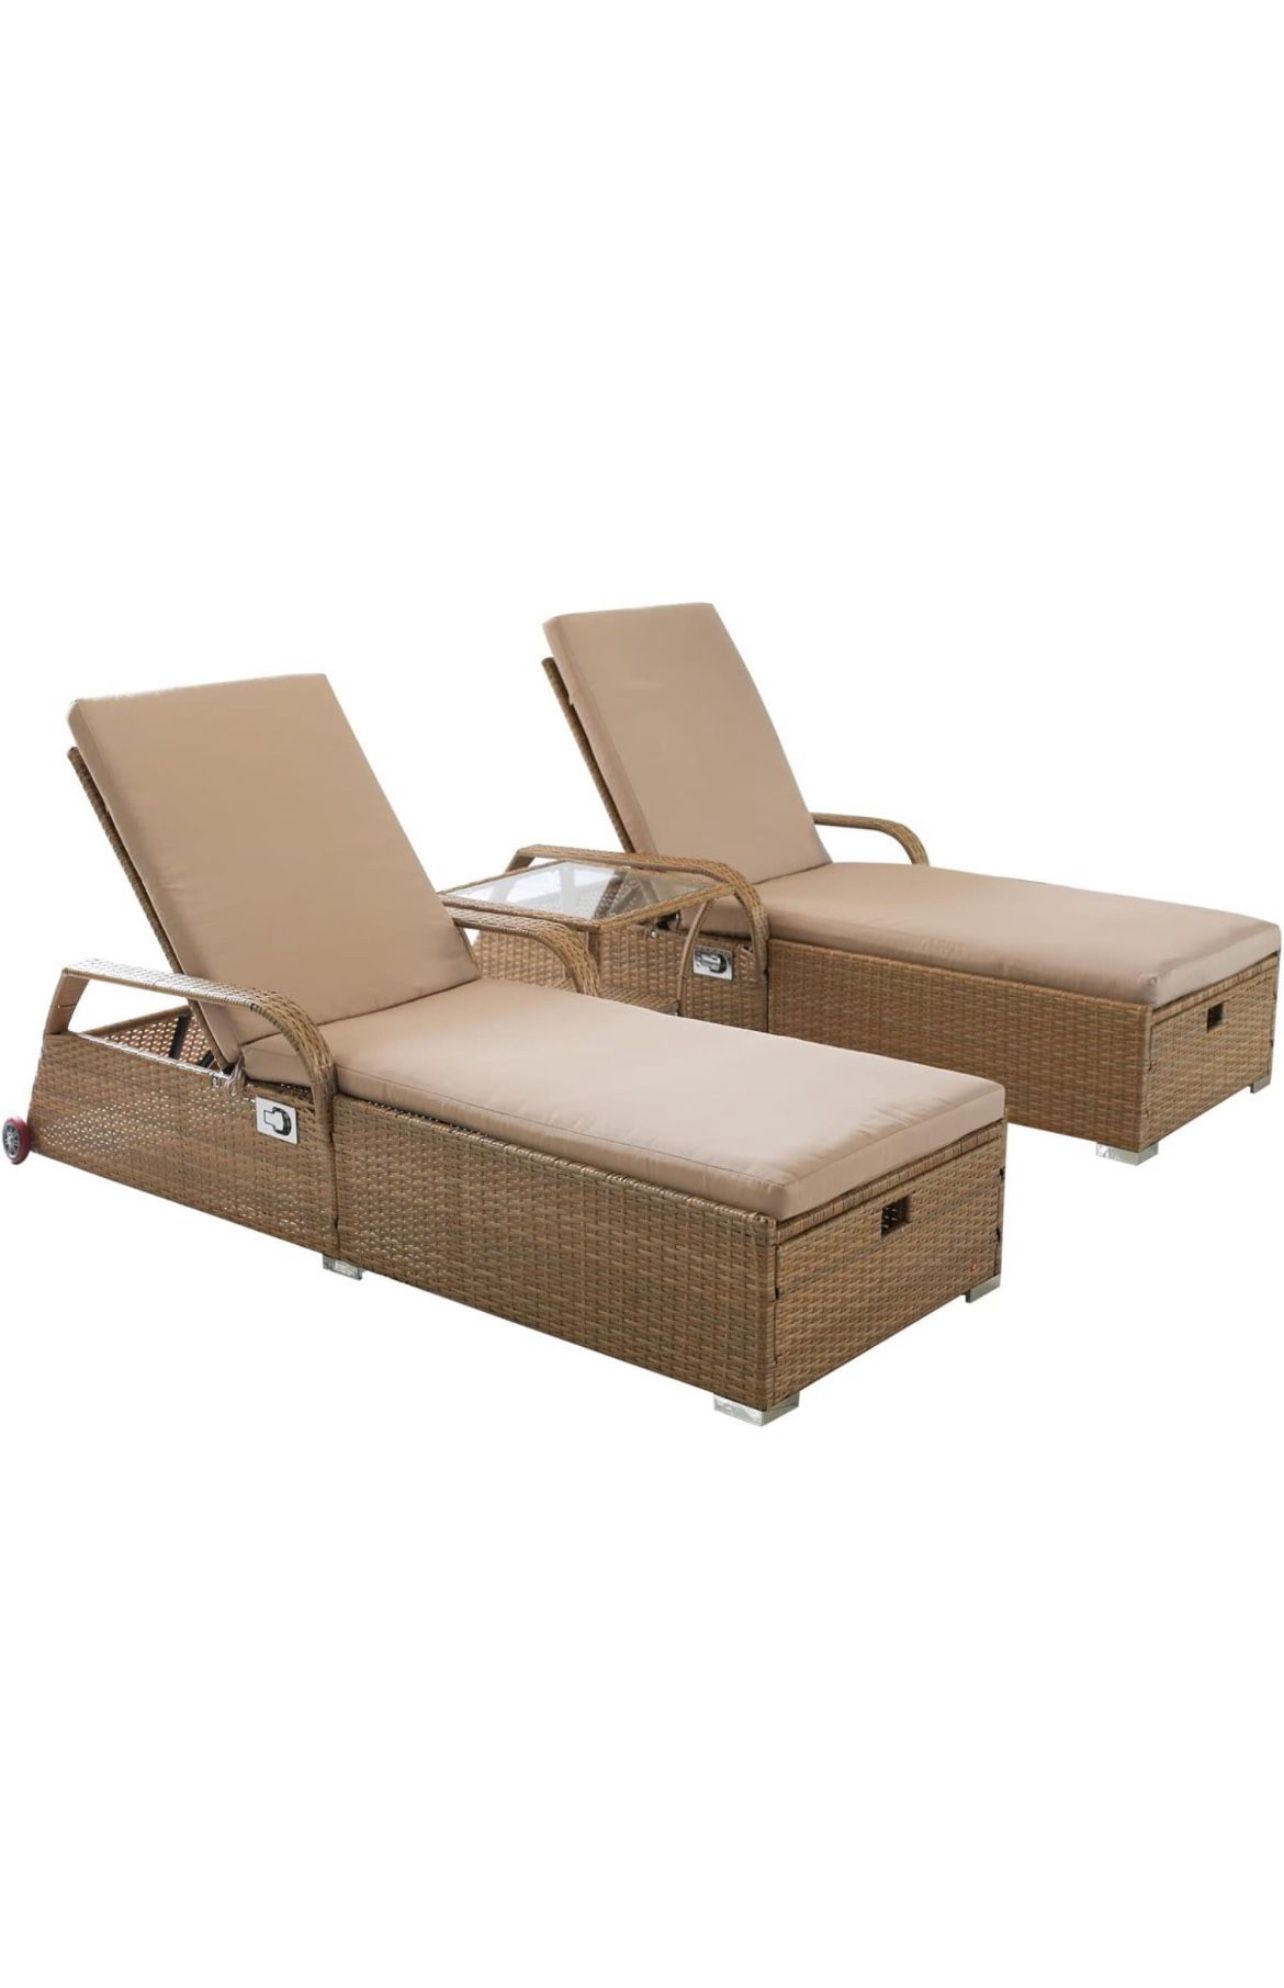 3 PC Outdoor Lounge Chair